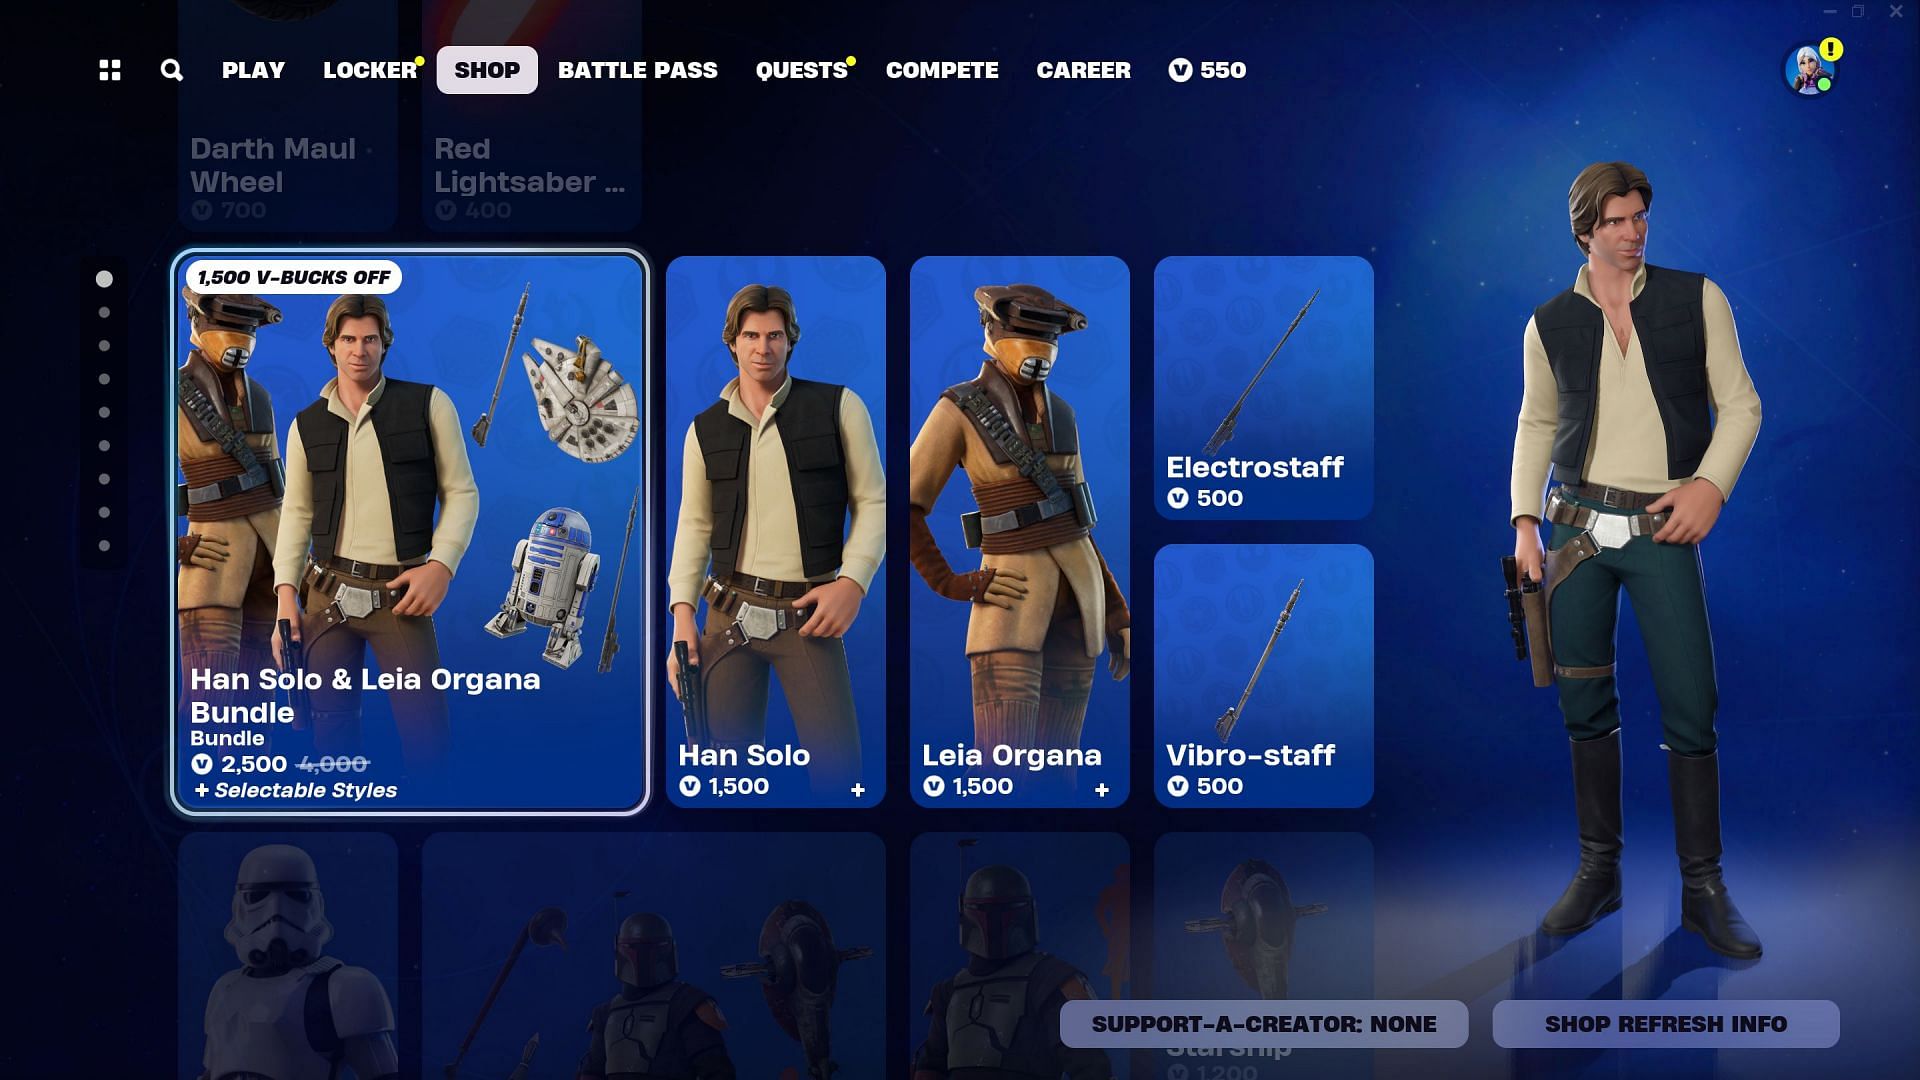 Han Solo and Leia Organa skins could be listed until the end of Chapter 5 Season 2 (Image via Epic Games/Fortnite)